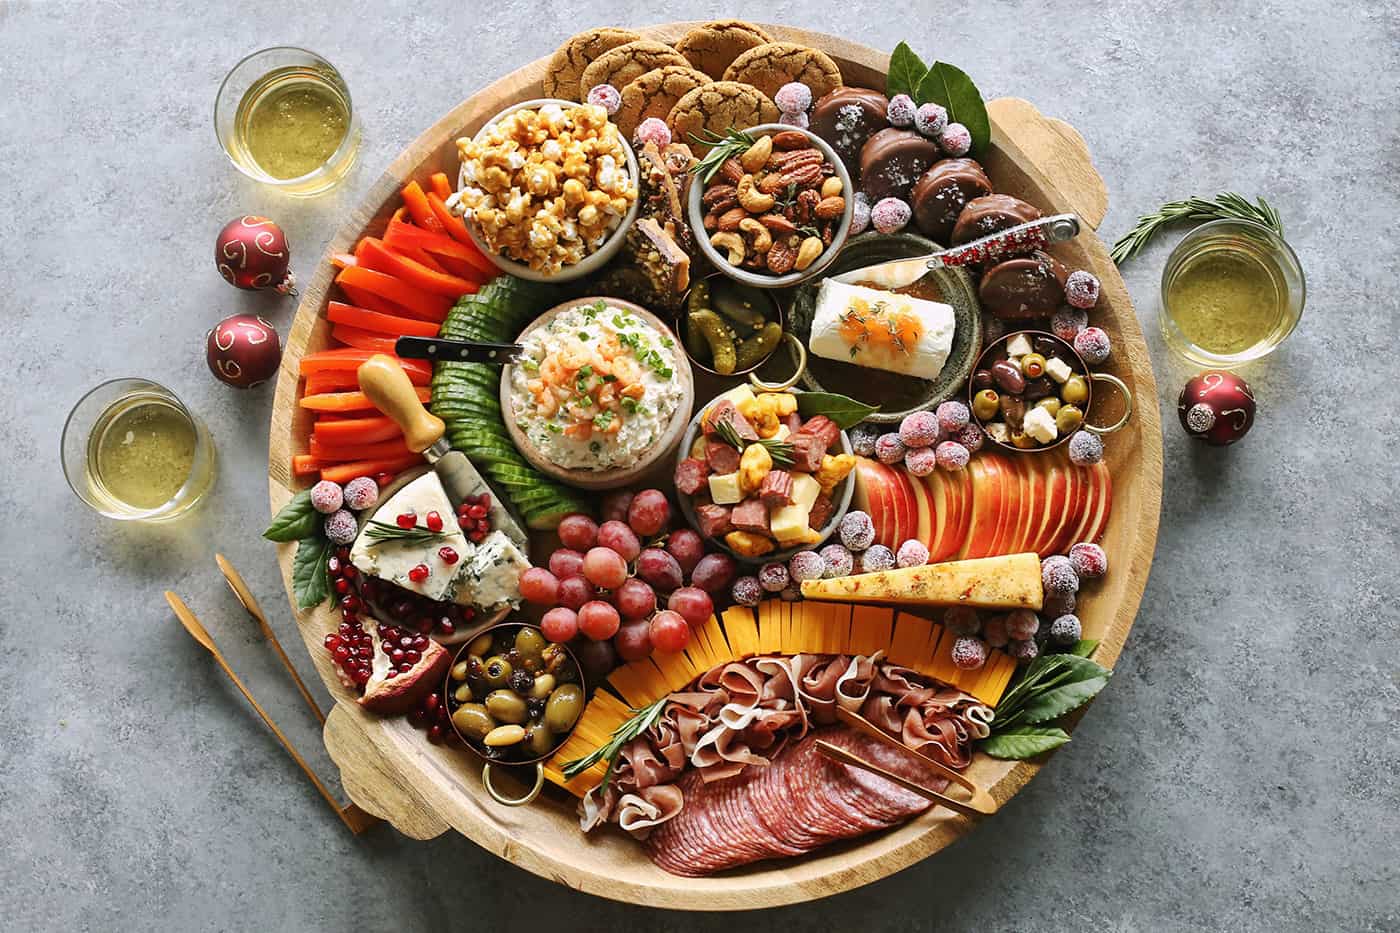 a large round wood charcuterie board full of meats, cheeses, and other nibbles